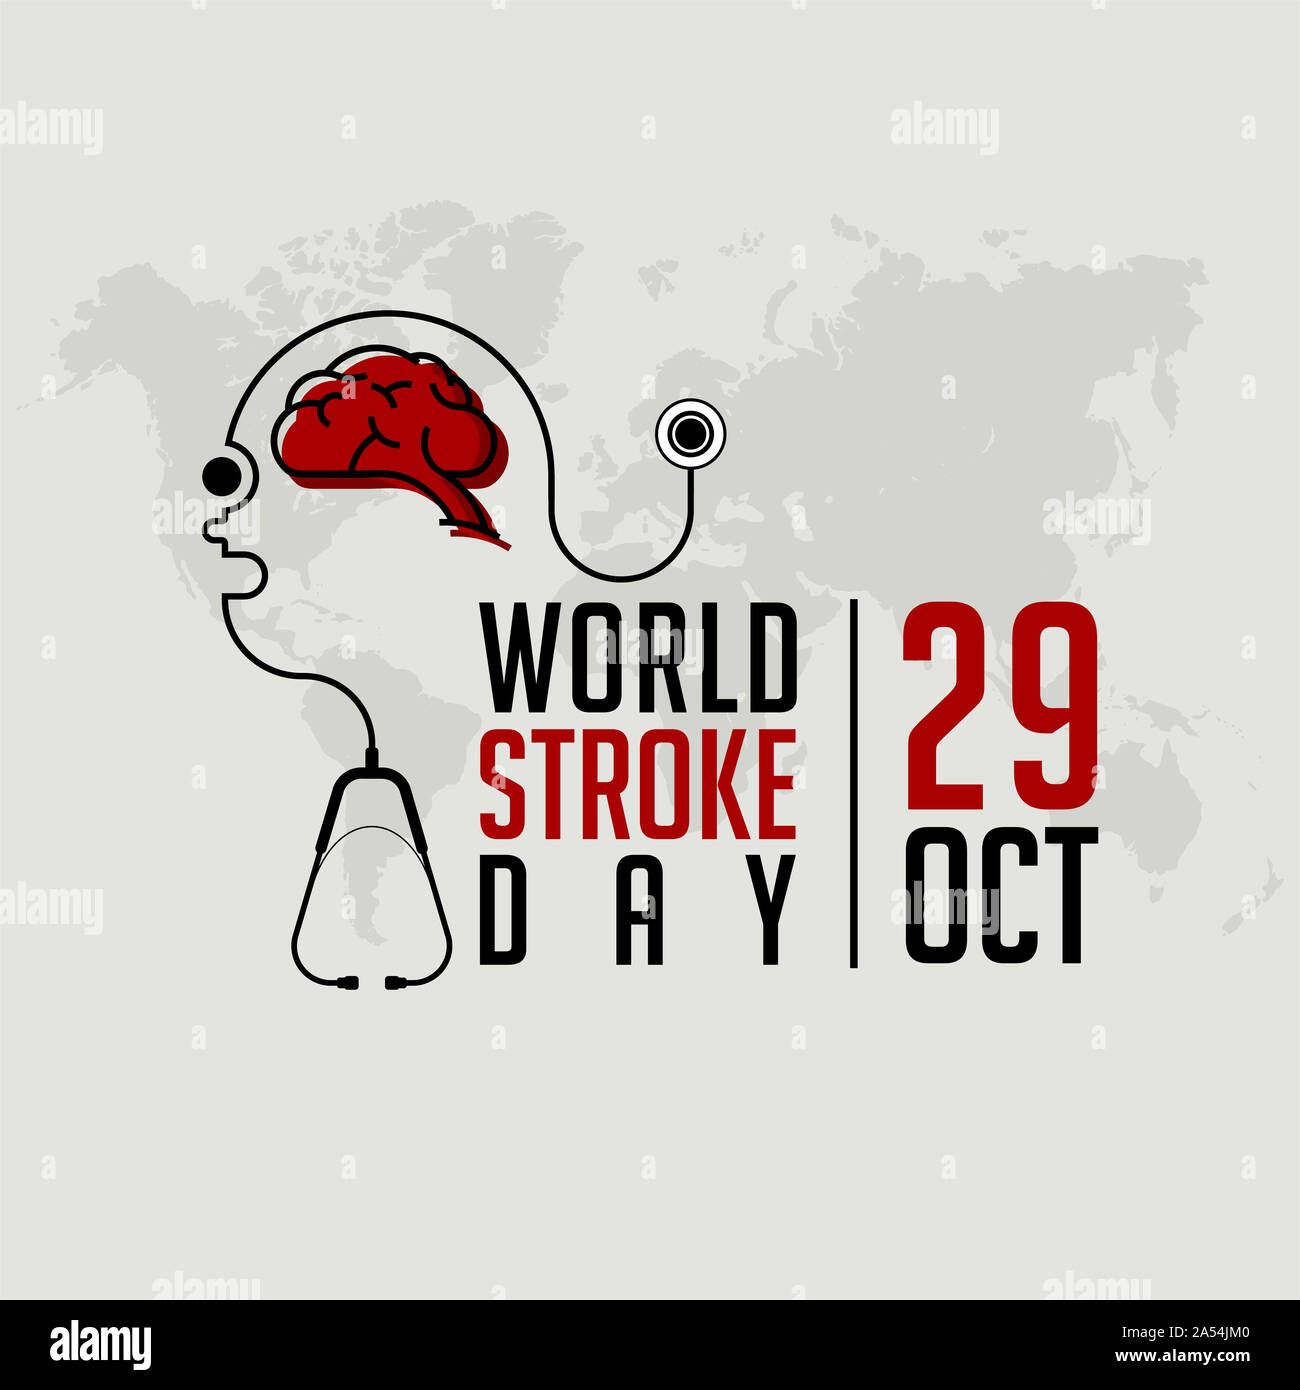 World Stroke Day on October 29, With Stethoscope Human Head and Brain vector design Stock Photo